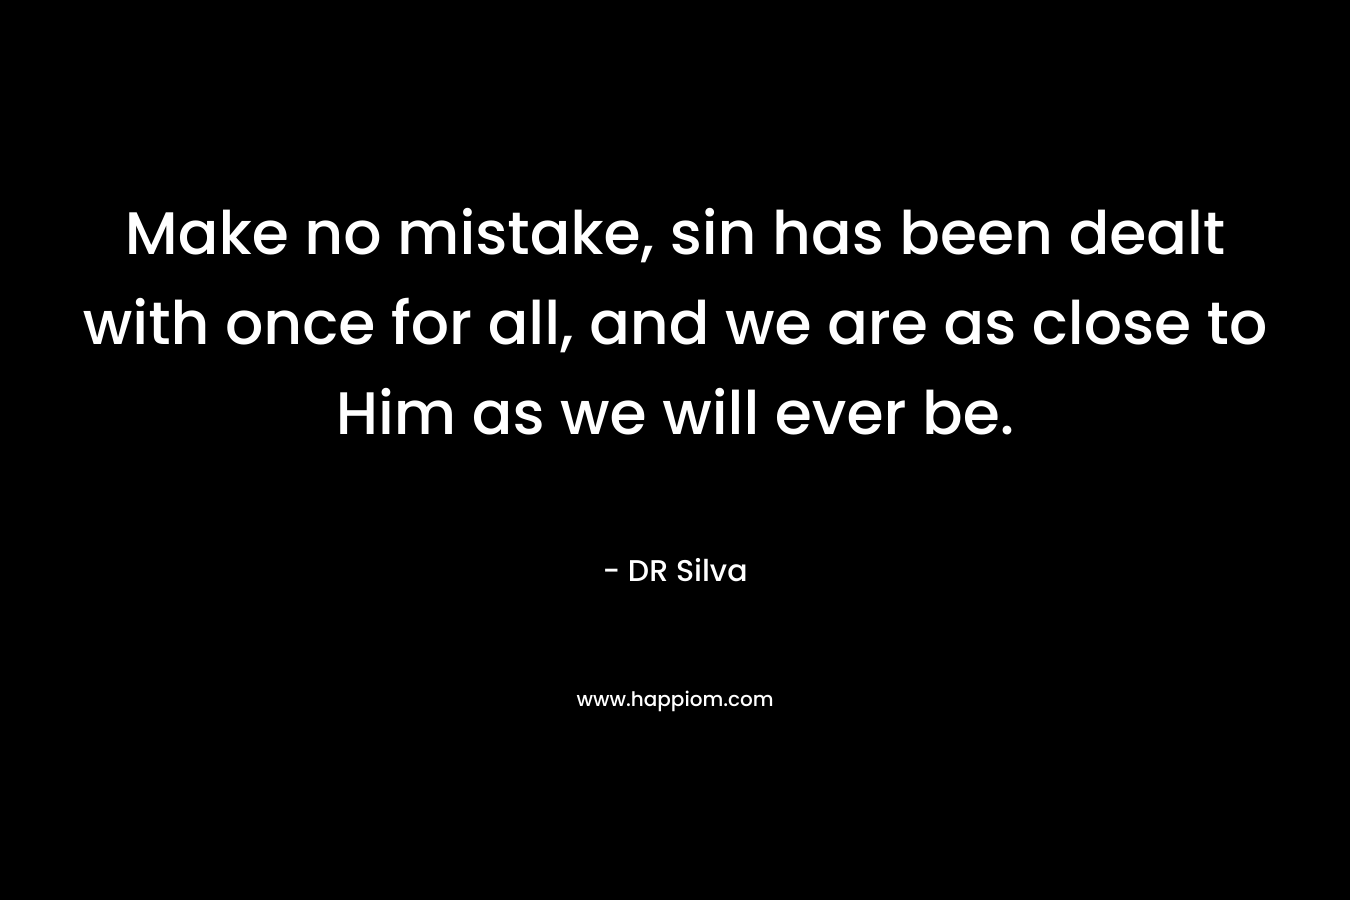 Make no mistake, sin has been dealt with once for all, and we are as close to Him as we will ever be. – DR Silva